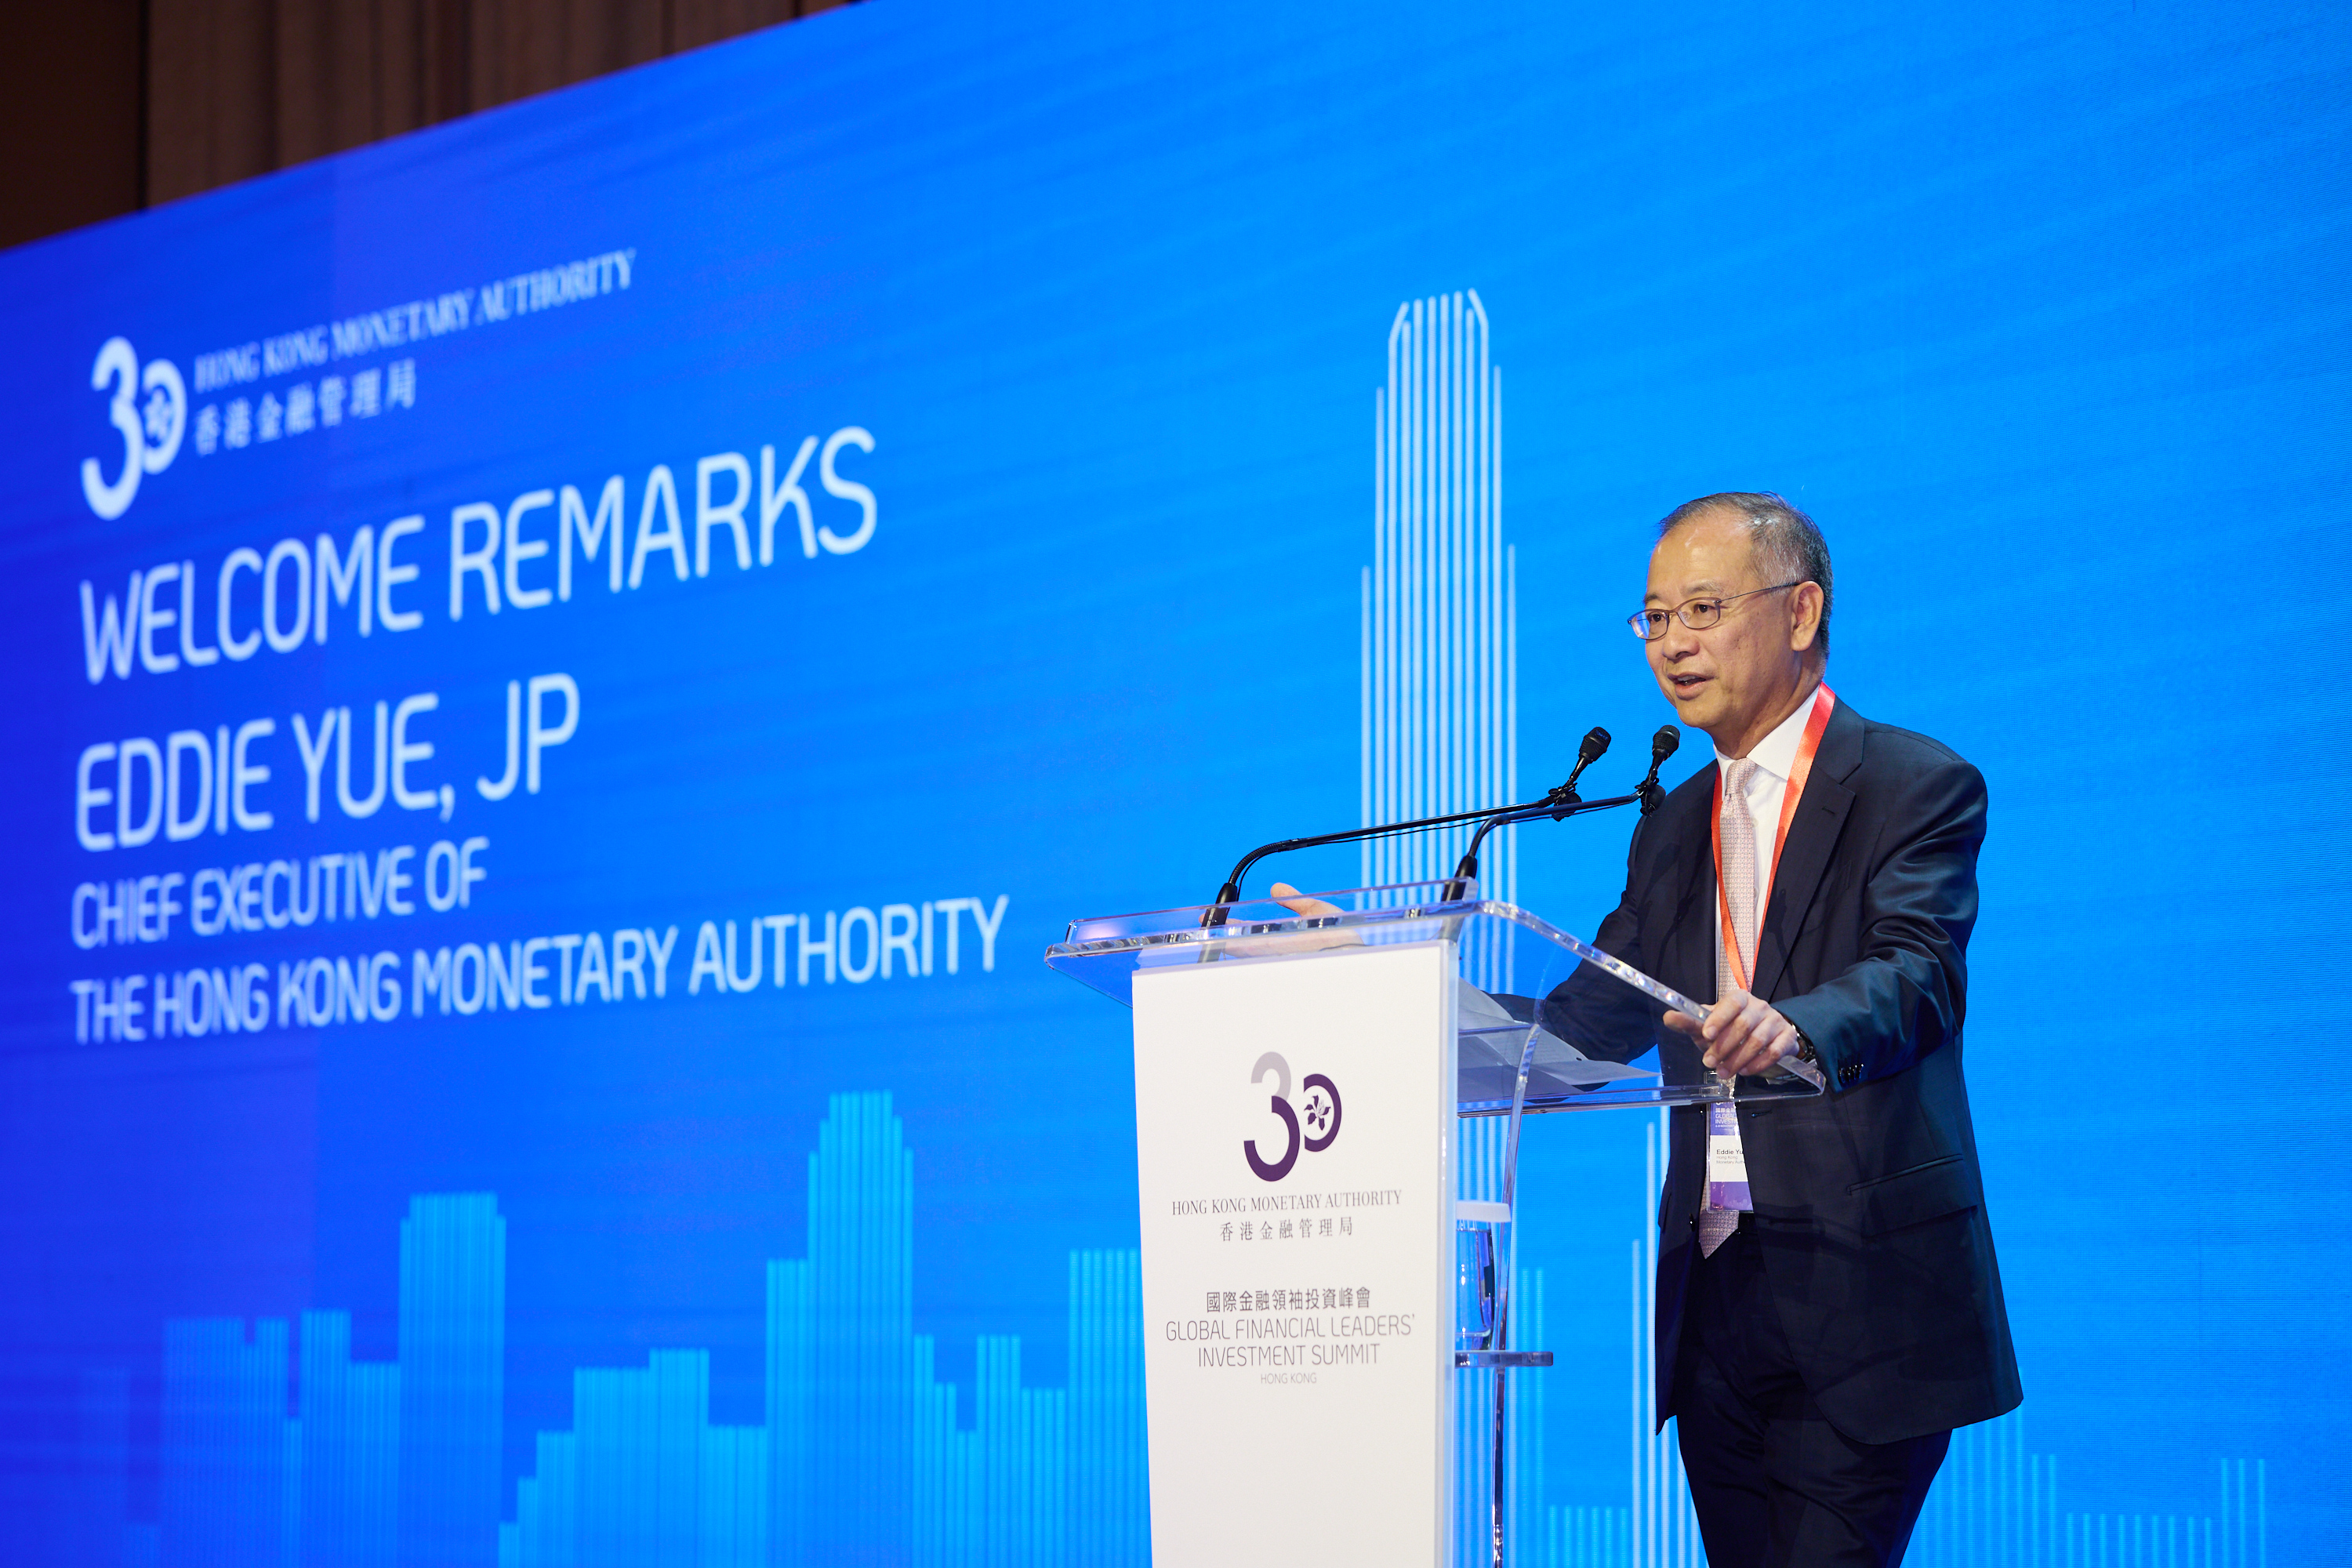 Mr Eddie Yue, Chief Executive of the Hong Kong Monetary Authority, delivers welcome remarks at the Global Financial Leaders’ Investment Summit on 7 November. 